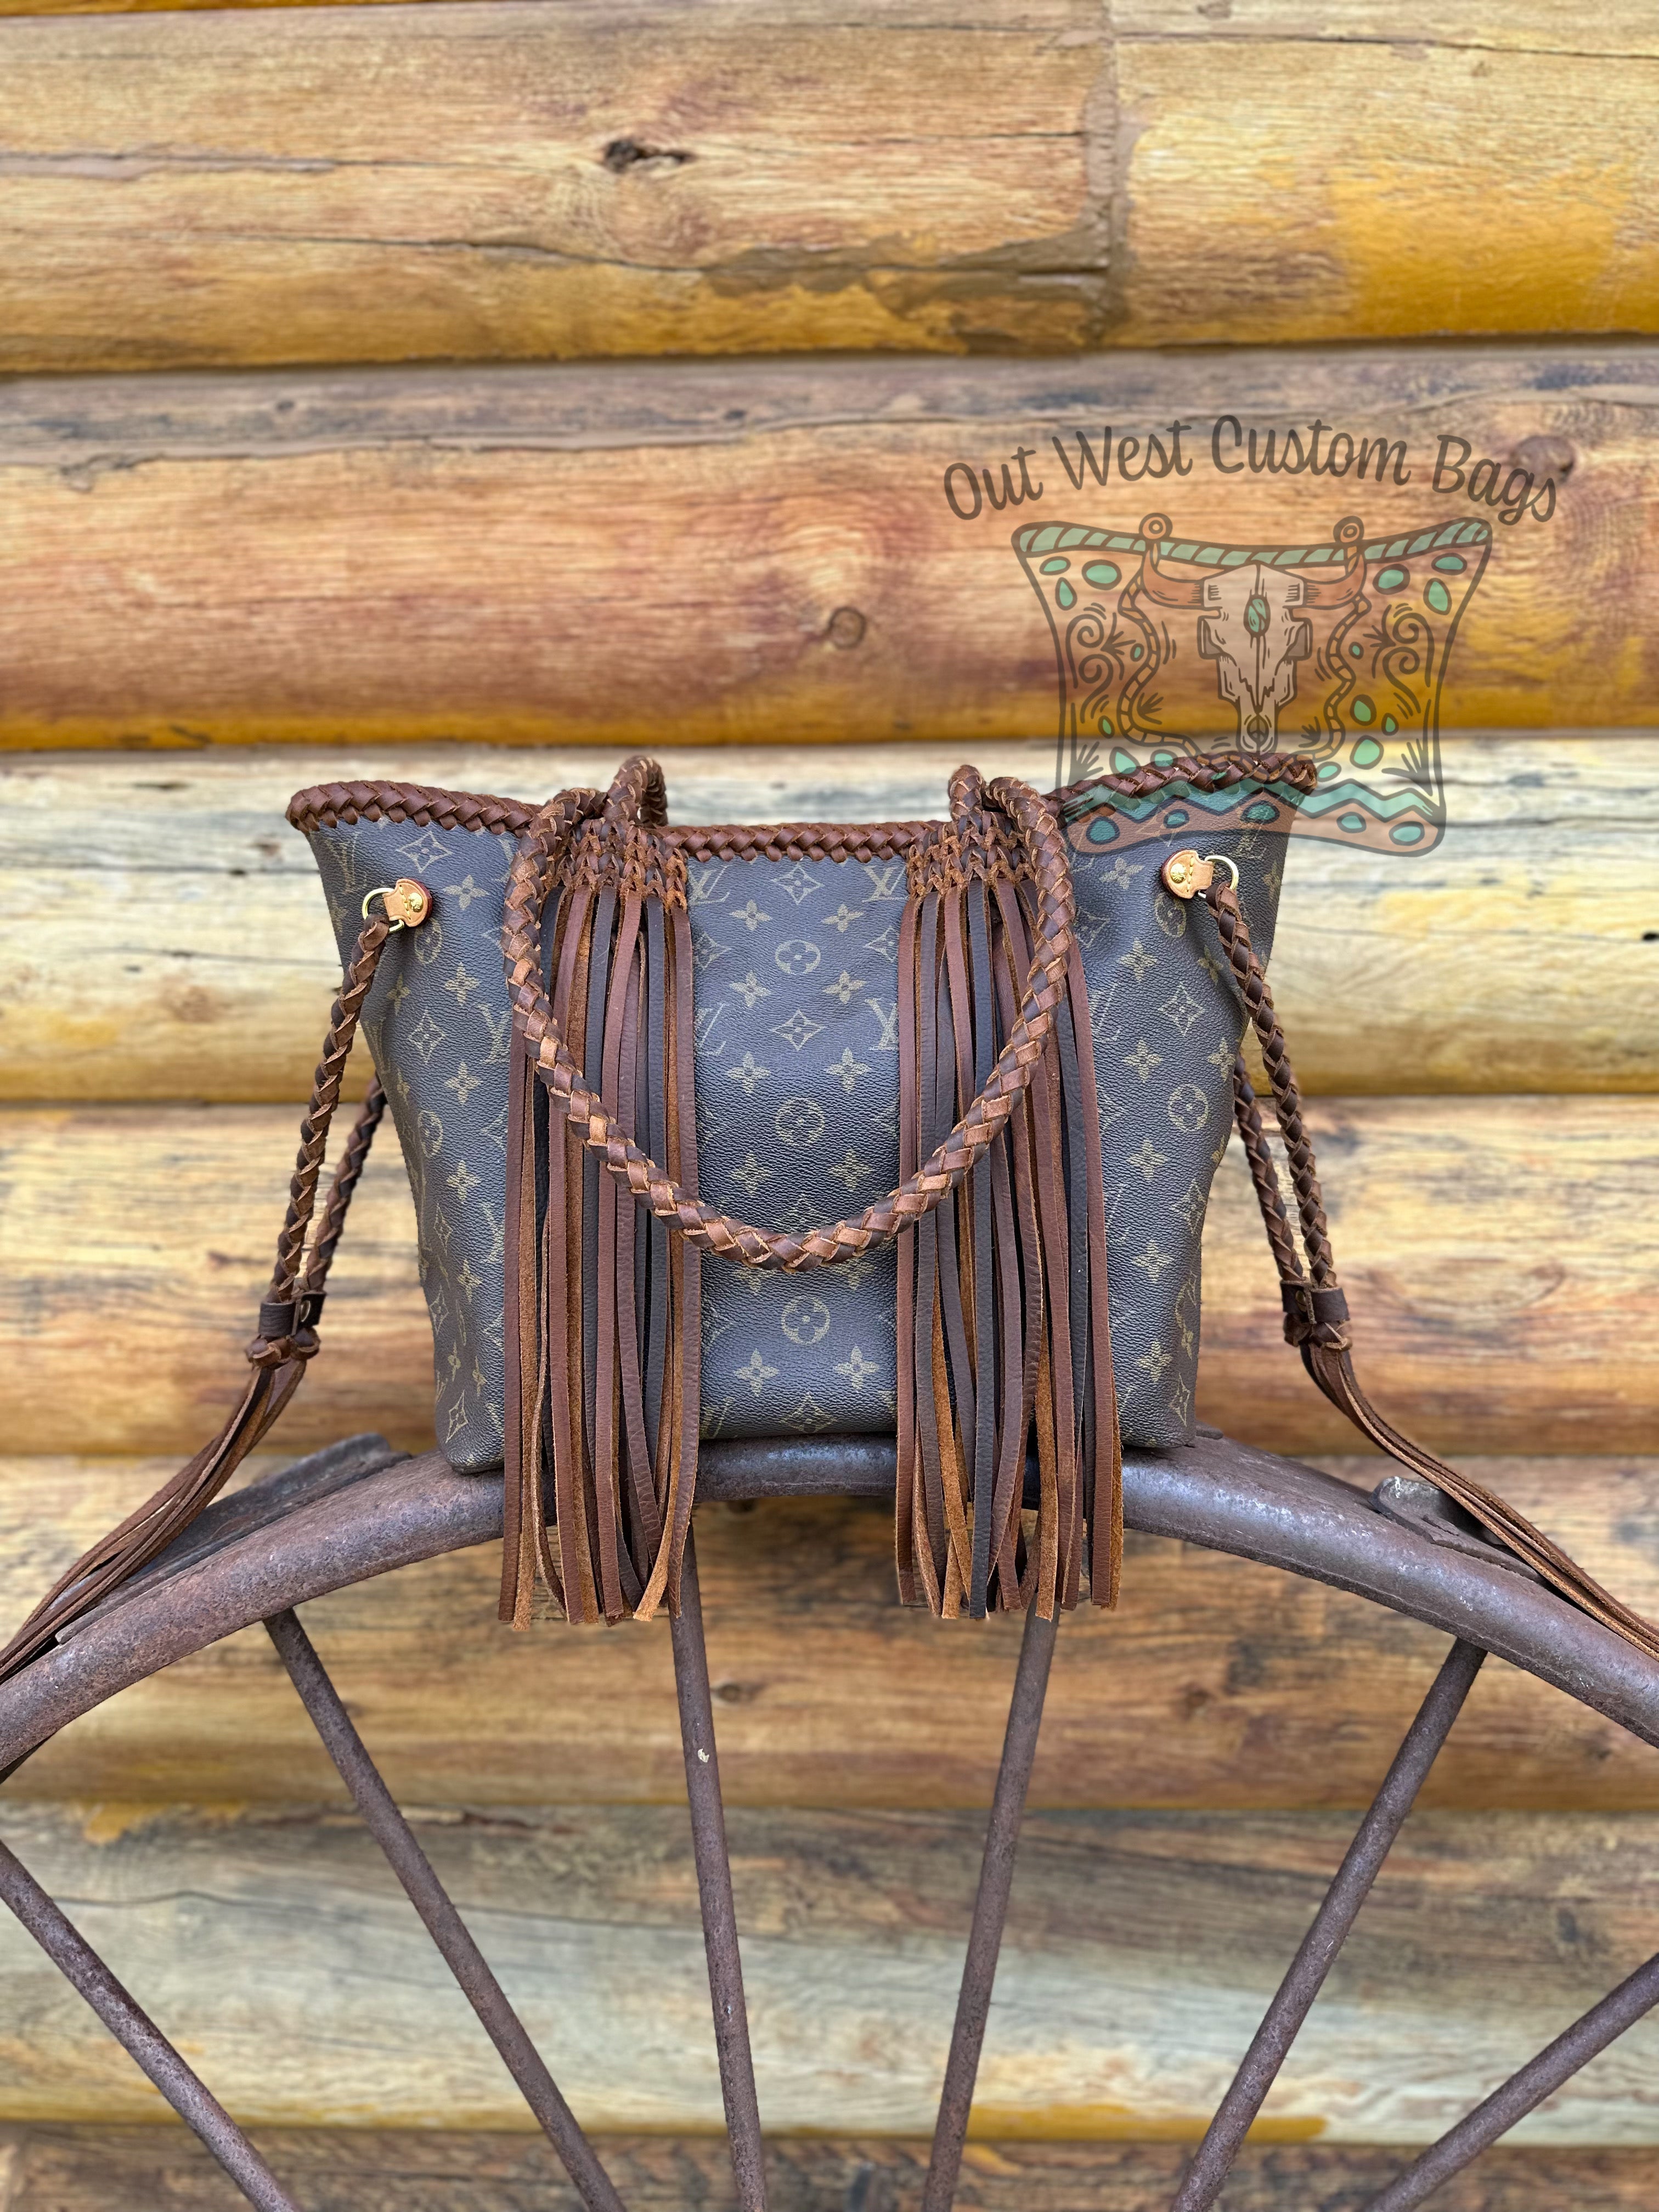 Out West Montsouris Backpack Revamped Leather Braiding and Fringe – Out  West Custom Bags